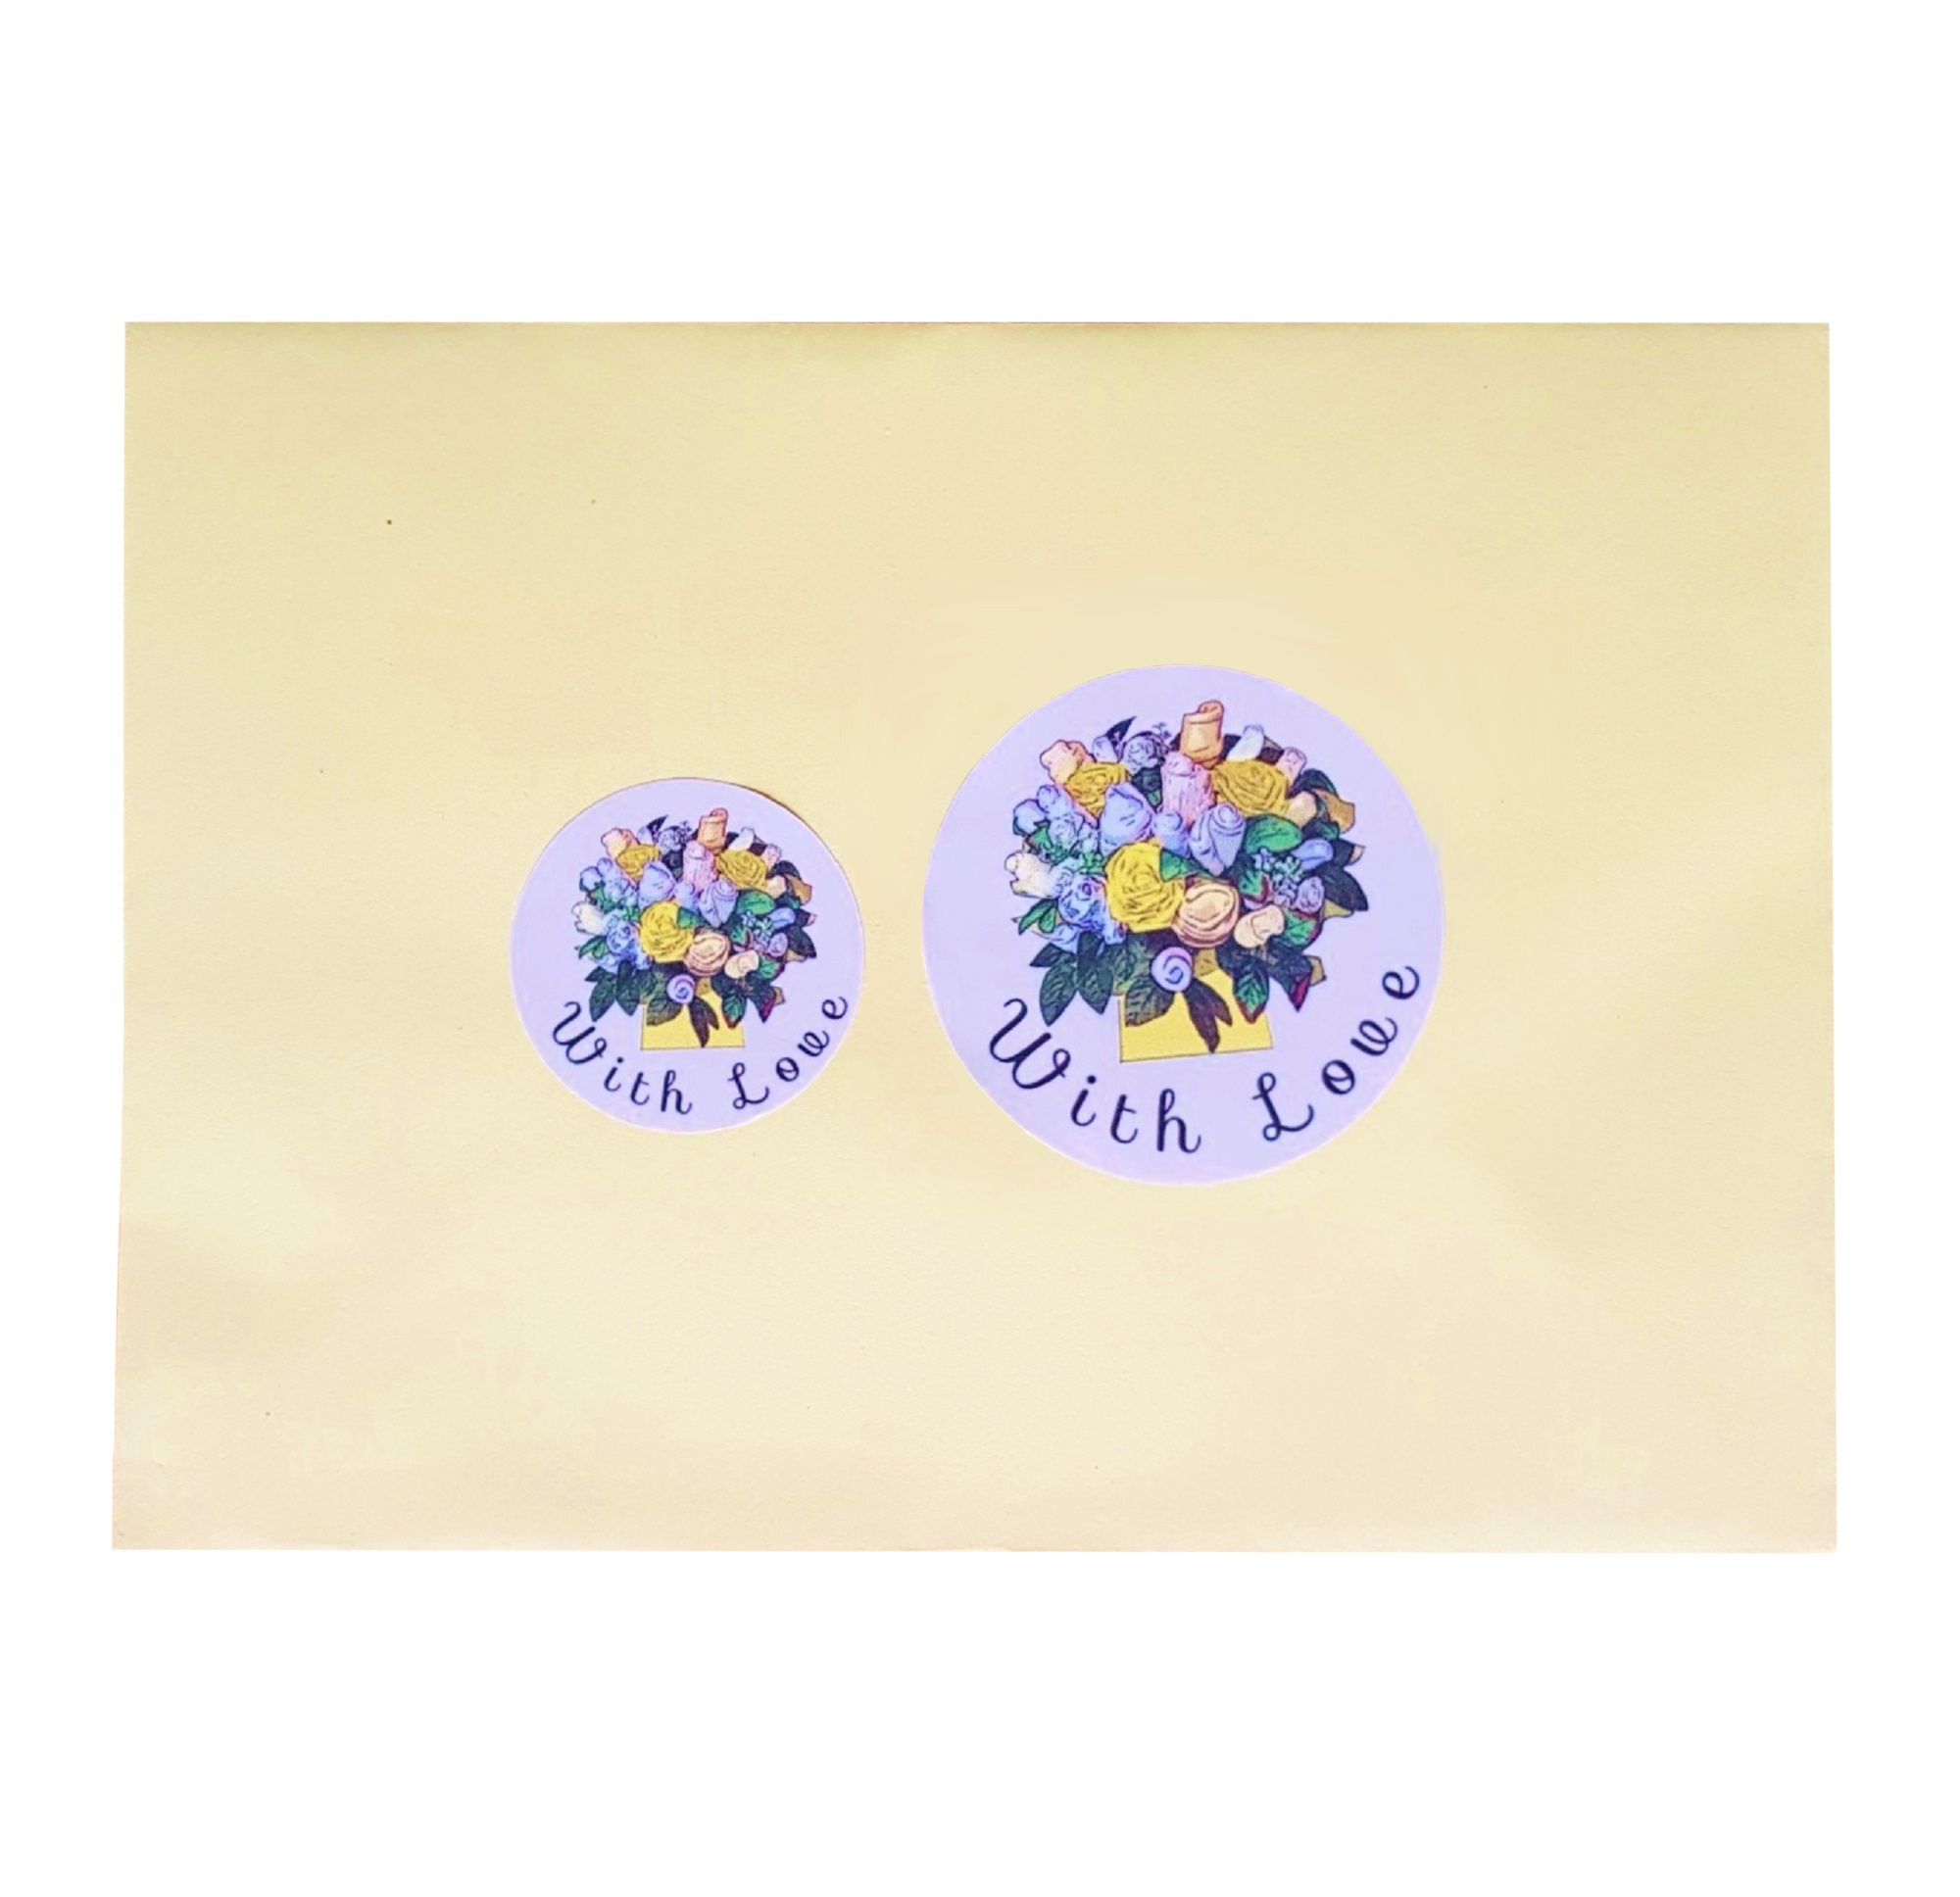 "With Love" Stickers - Yellow Floral Bouquet